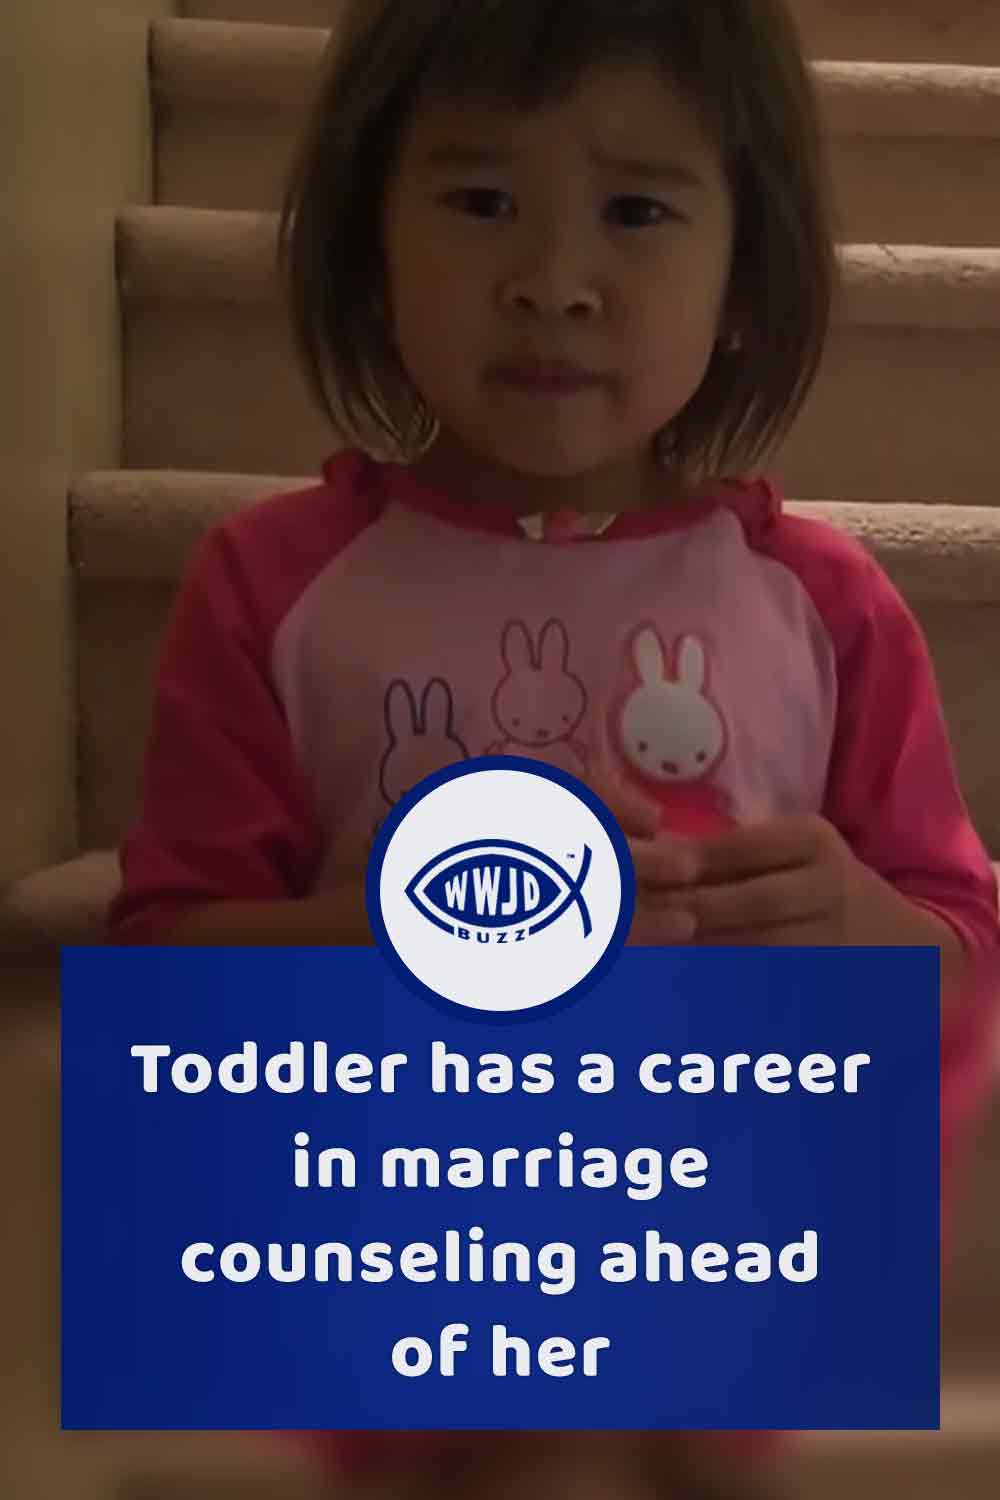 Toddler has a career in marriage counseling ahead of her